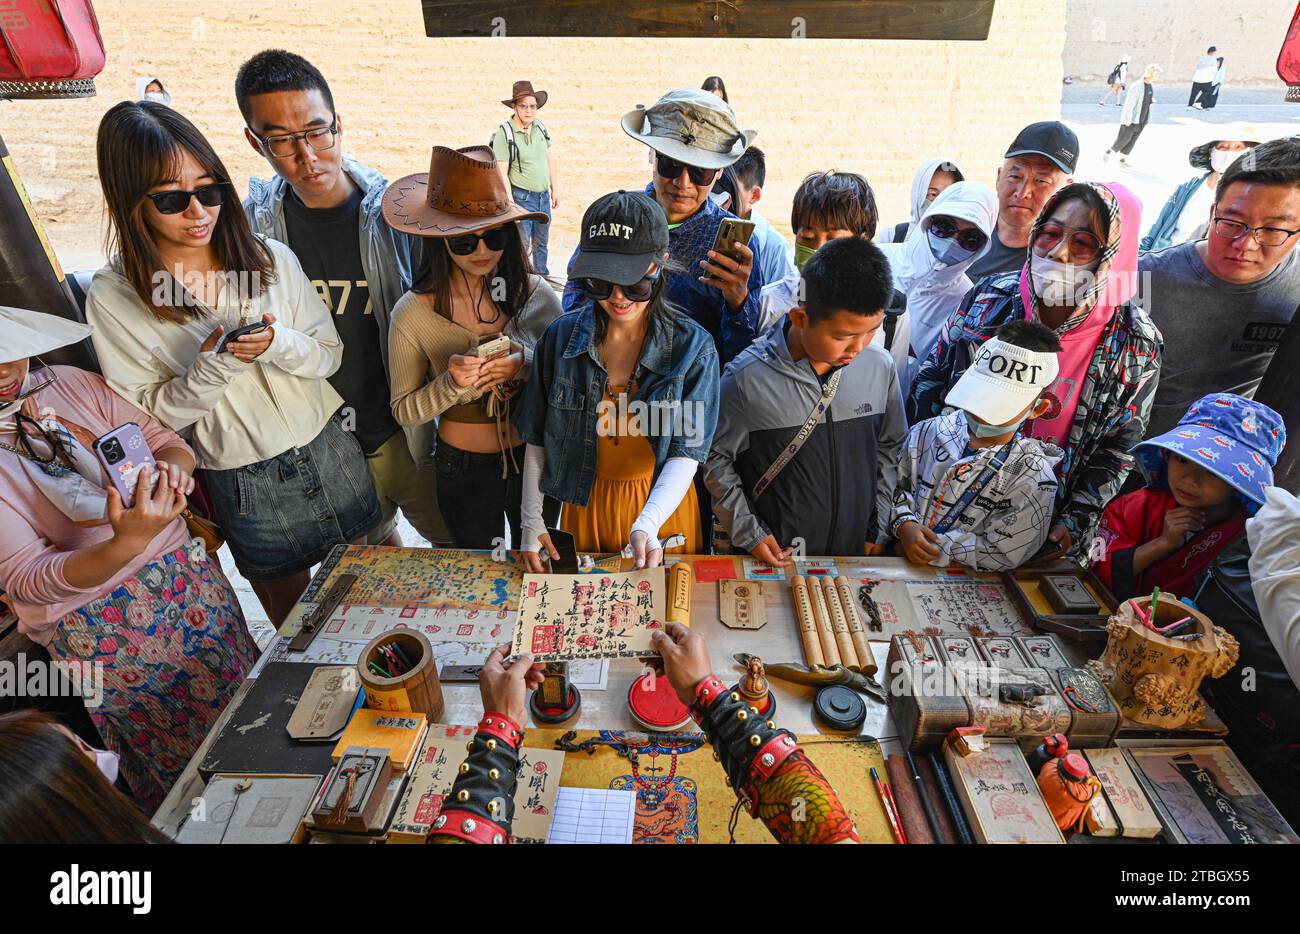 (231207) -- JIAYUGUAN, Dec. 7, 2023 (Xinhua) -- Visitors buy ancient 'visas' at Li Sen's stall at the Jiayu Pass scenic area in Jiayuguan City, northwest China's Gansu Province, July 14, 2023. Li Sen, 43, earns a living by playing the role of an ancient 'general' at the Jiayu Pass scenic area in the city of Jiayuguan, northwest China's Gansu Province. Visitors can buy ancient 'visas' at his stall. These documents are designed by Li and form an essential part of the role-play, allowing tourists to travel back into ancient China. Looking to the future, Li plans to systematically organize the Stock Photo